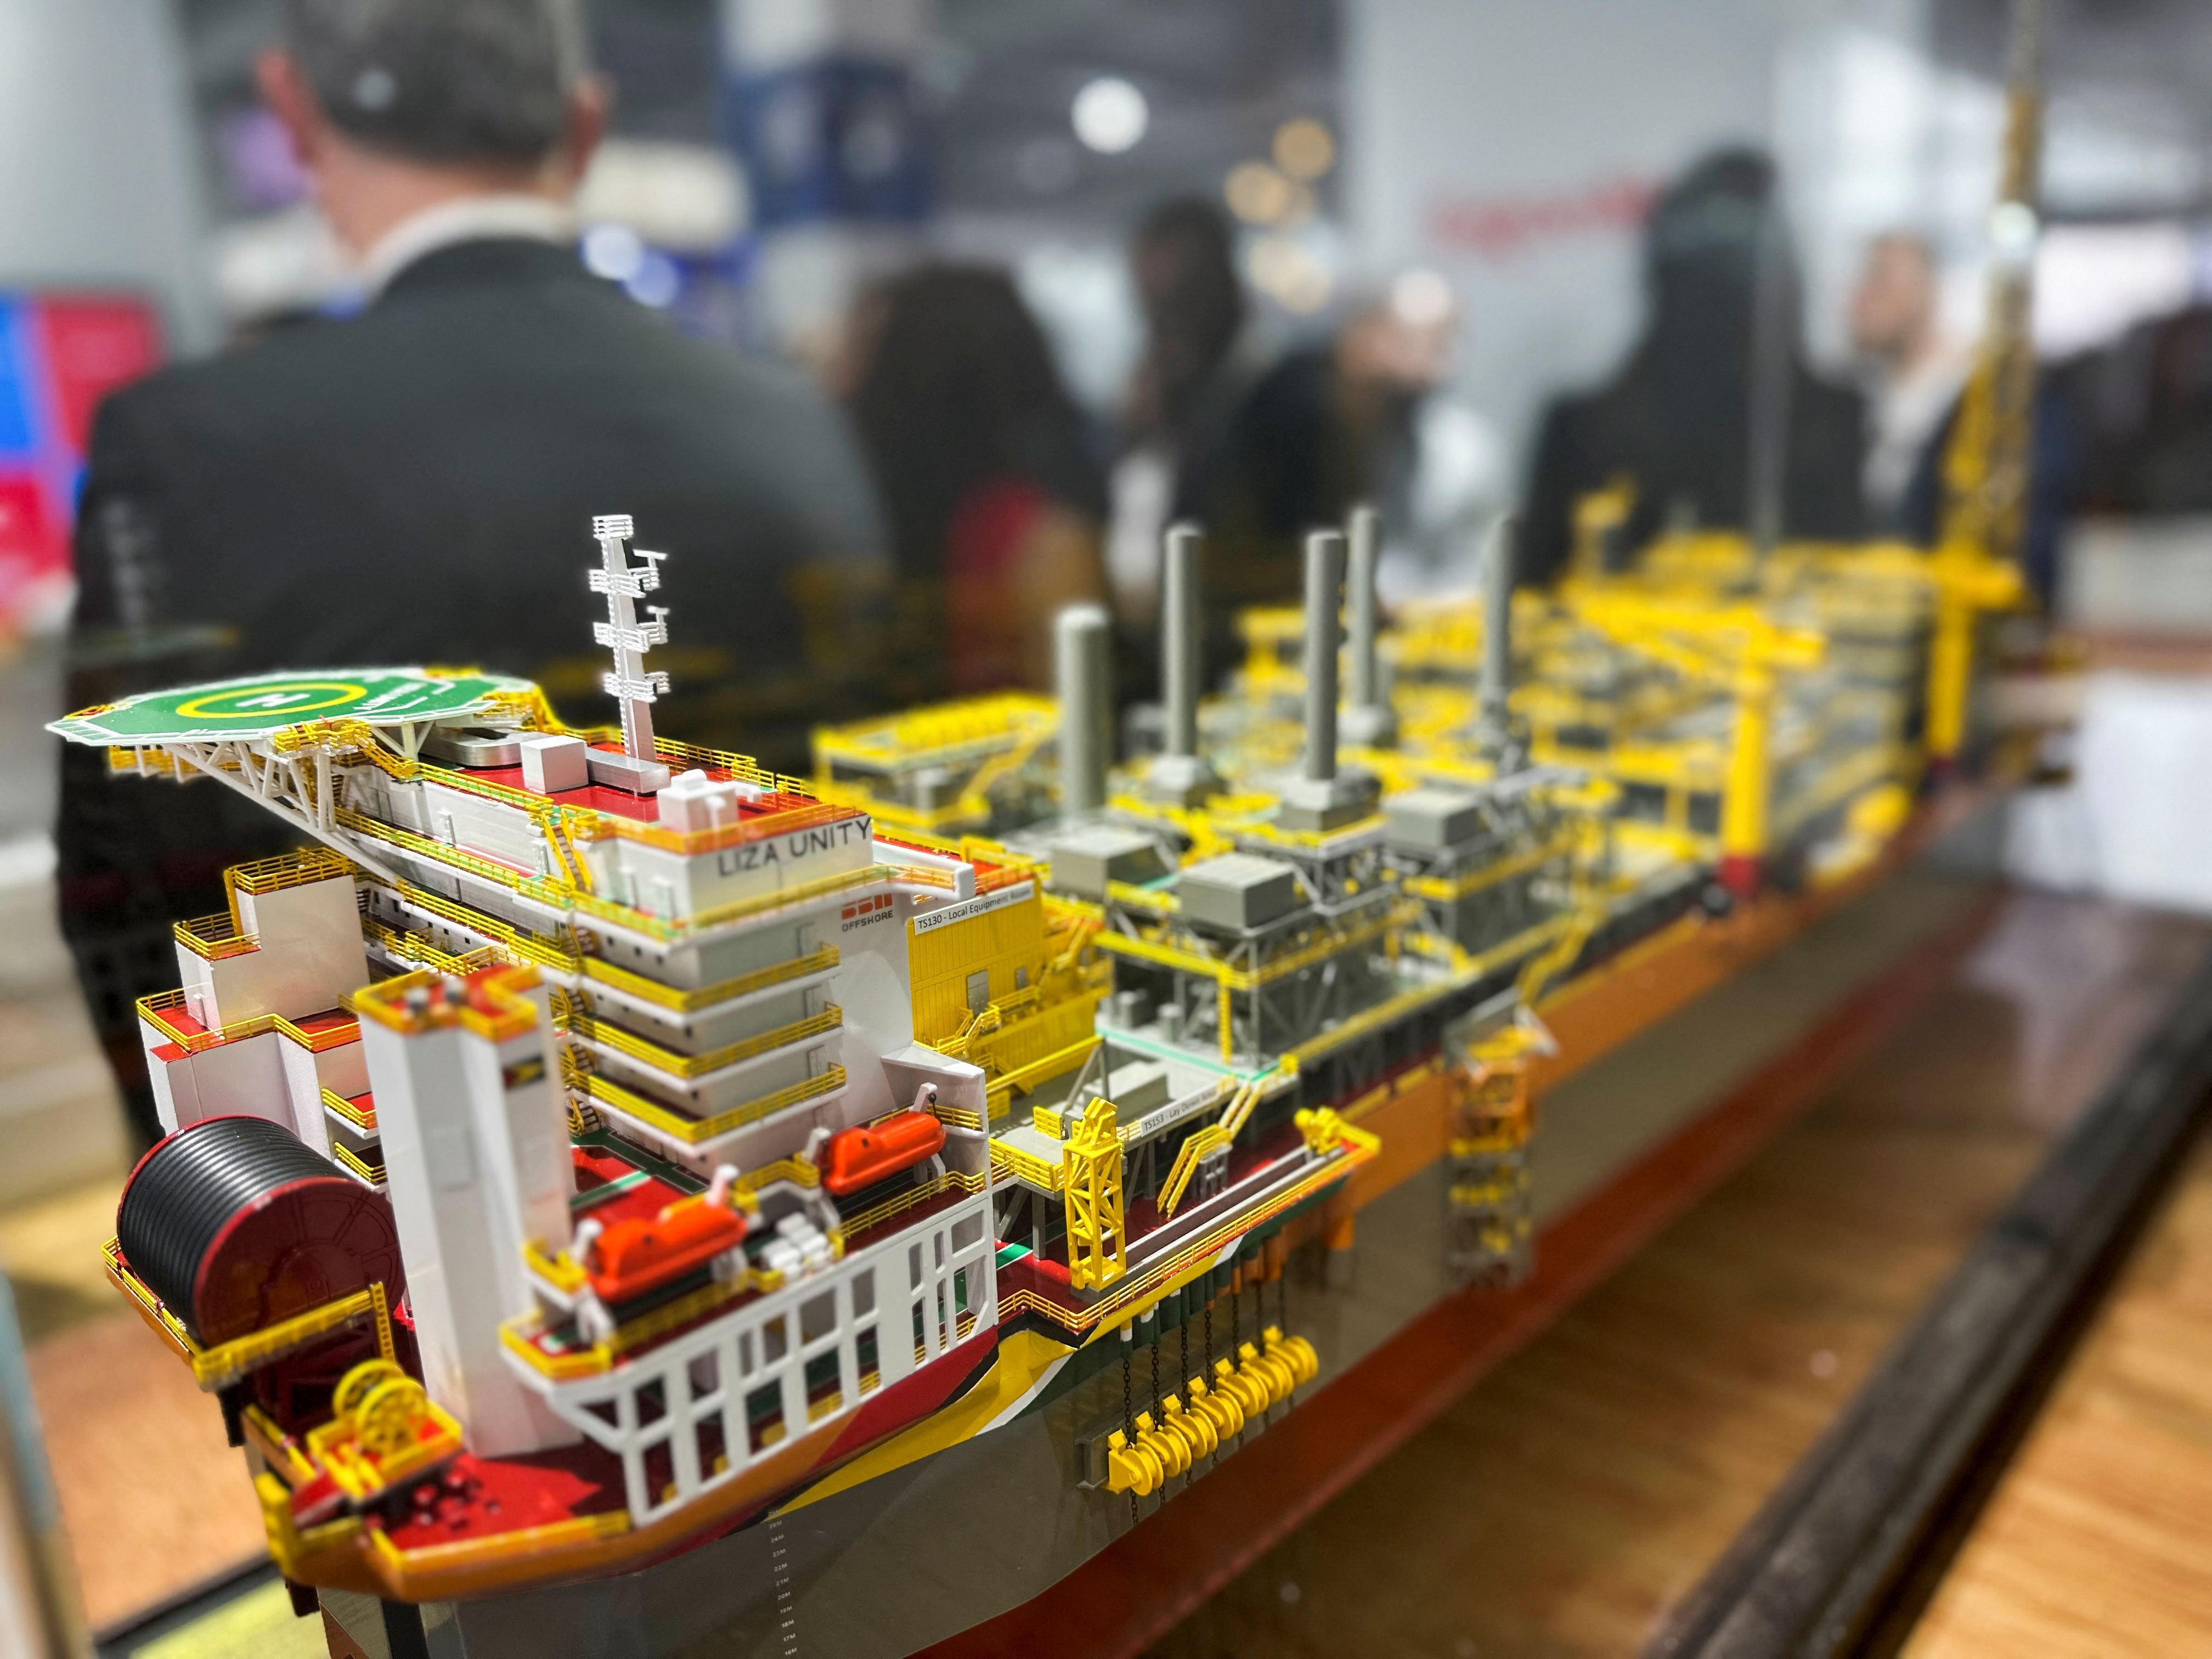 A replica of Exxon's Liza Unity production vessel is seen in the company's booth at Guyana Energy Conference and Expo in Georgetown